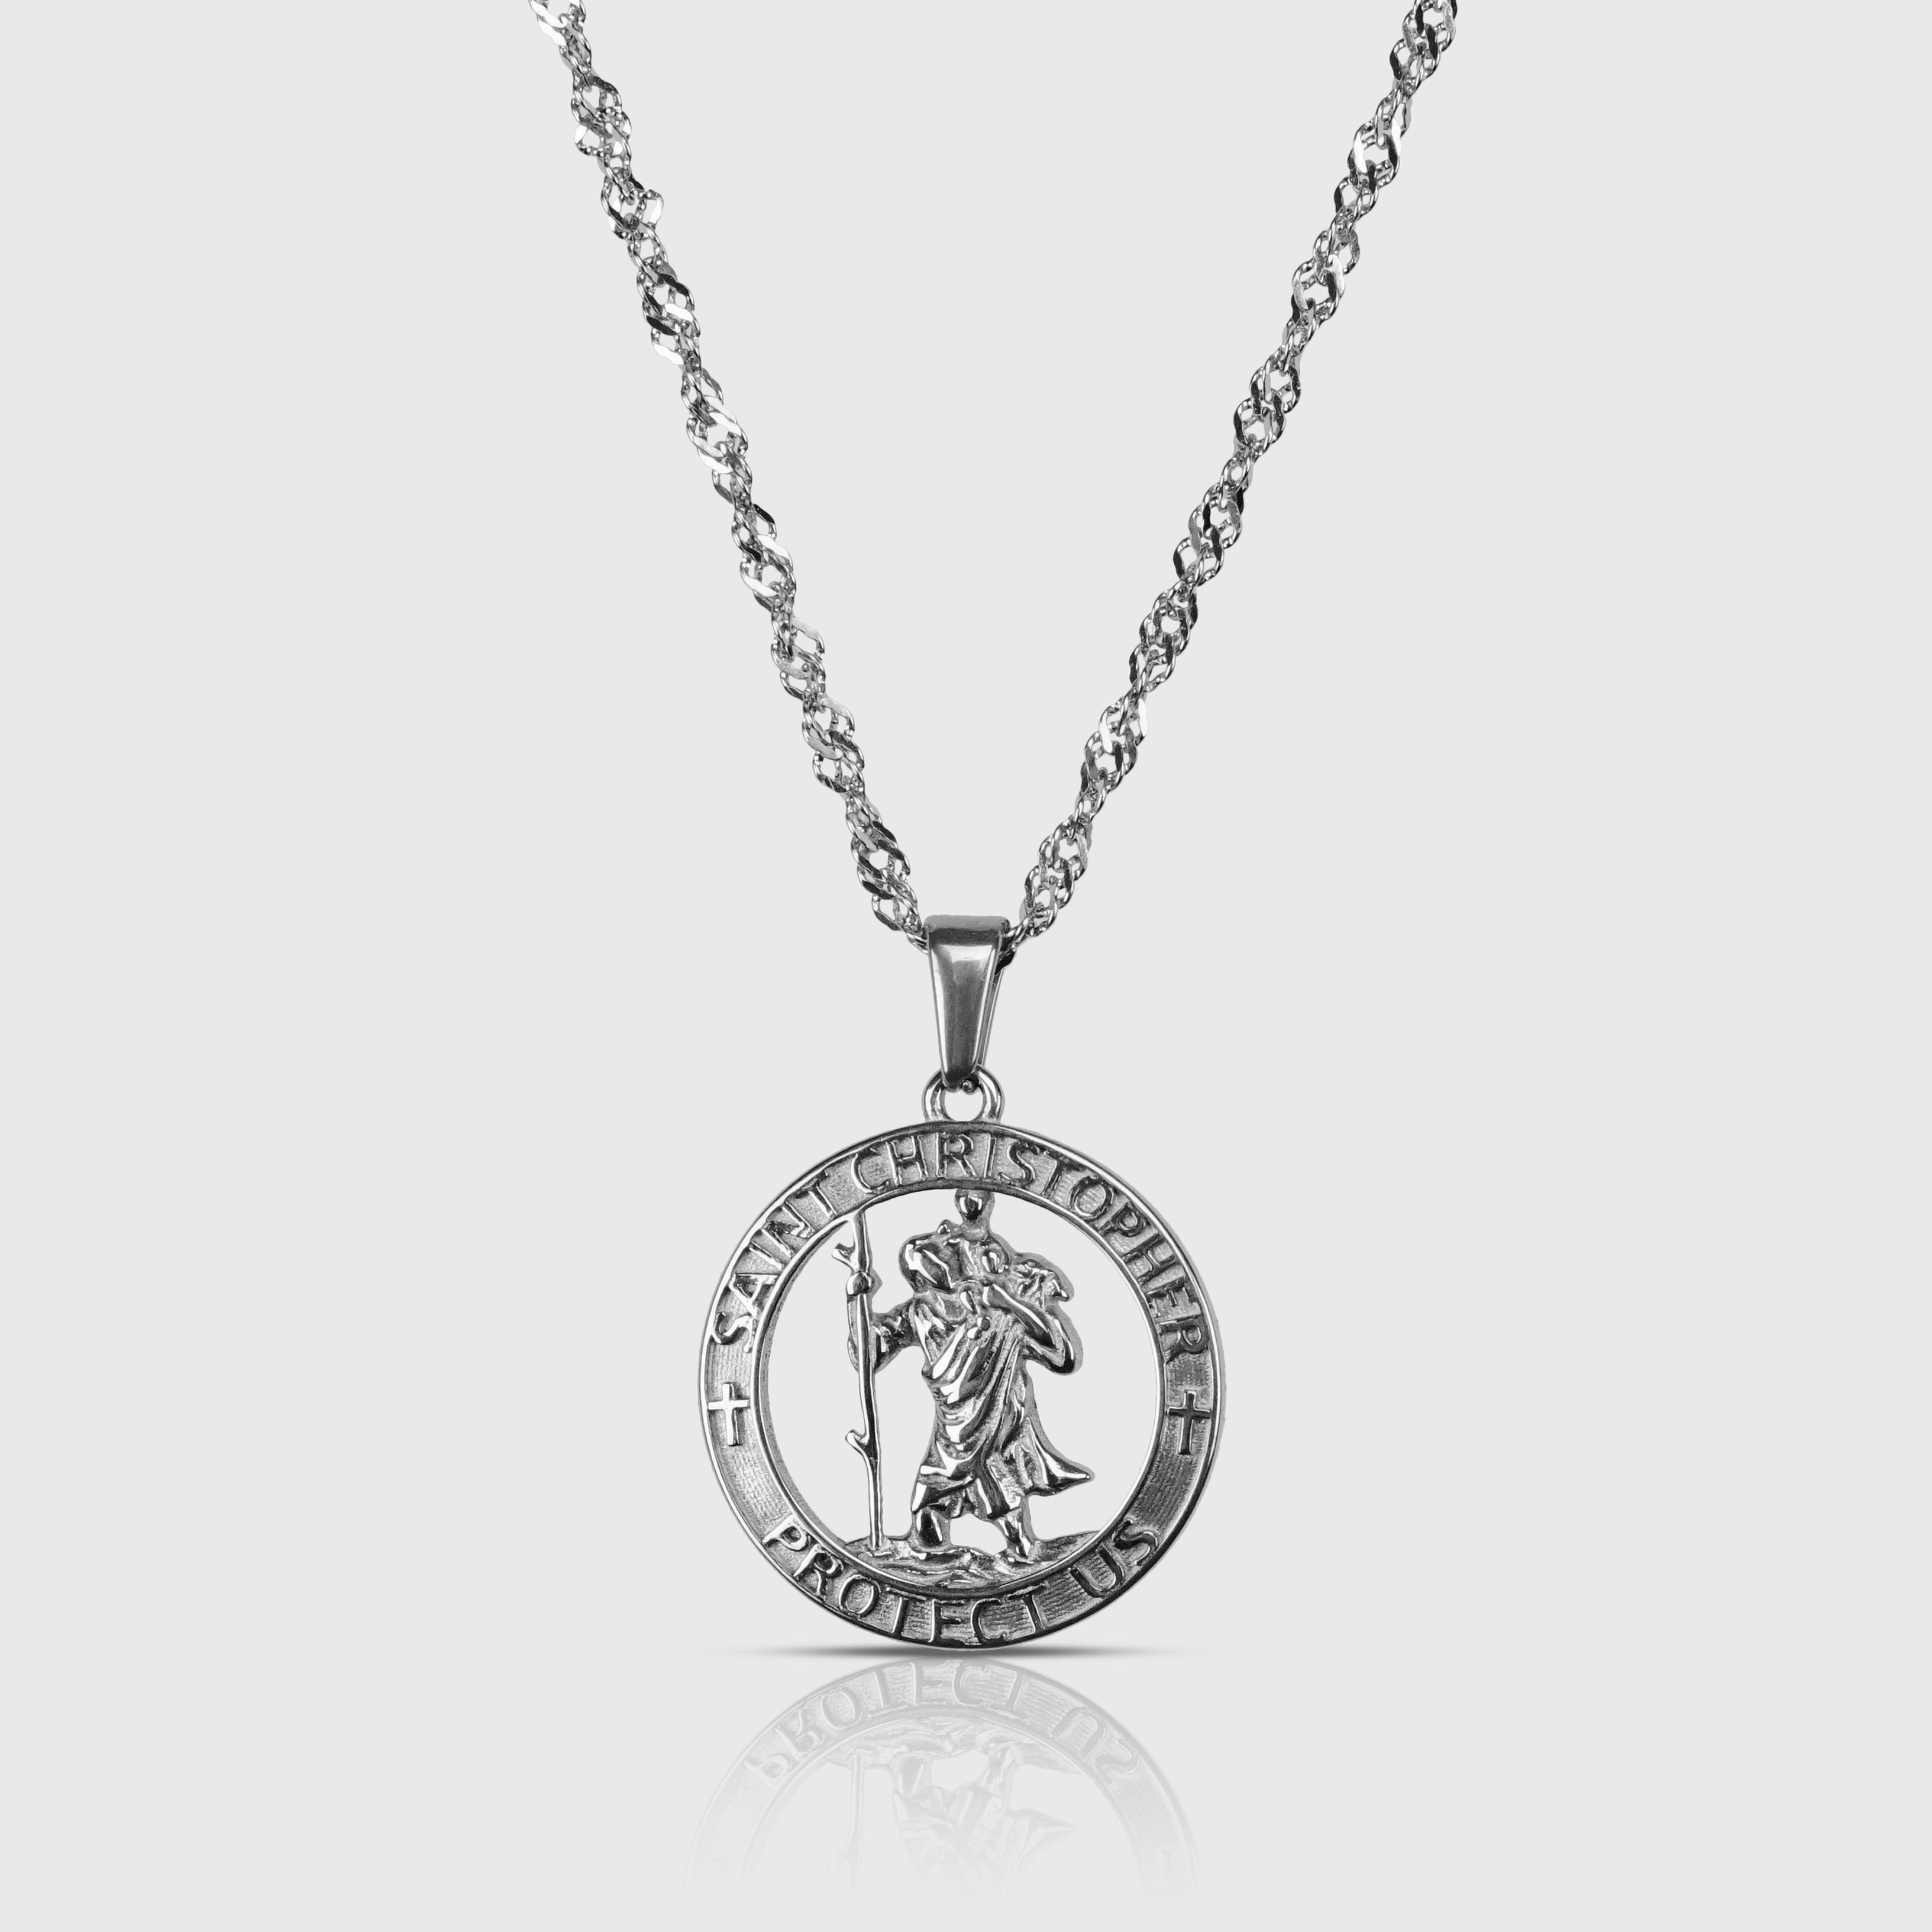 Saint Christopher Medieval True North Necklace with Compass Rose - Gol -  Whispering Cowgirl